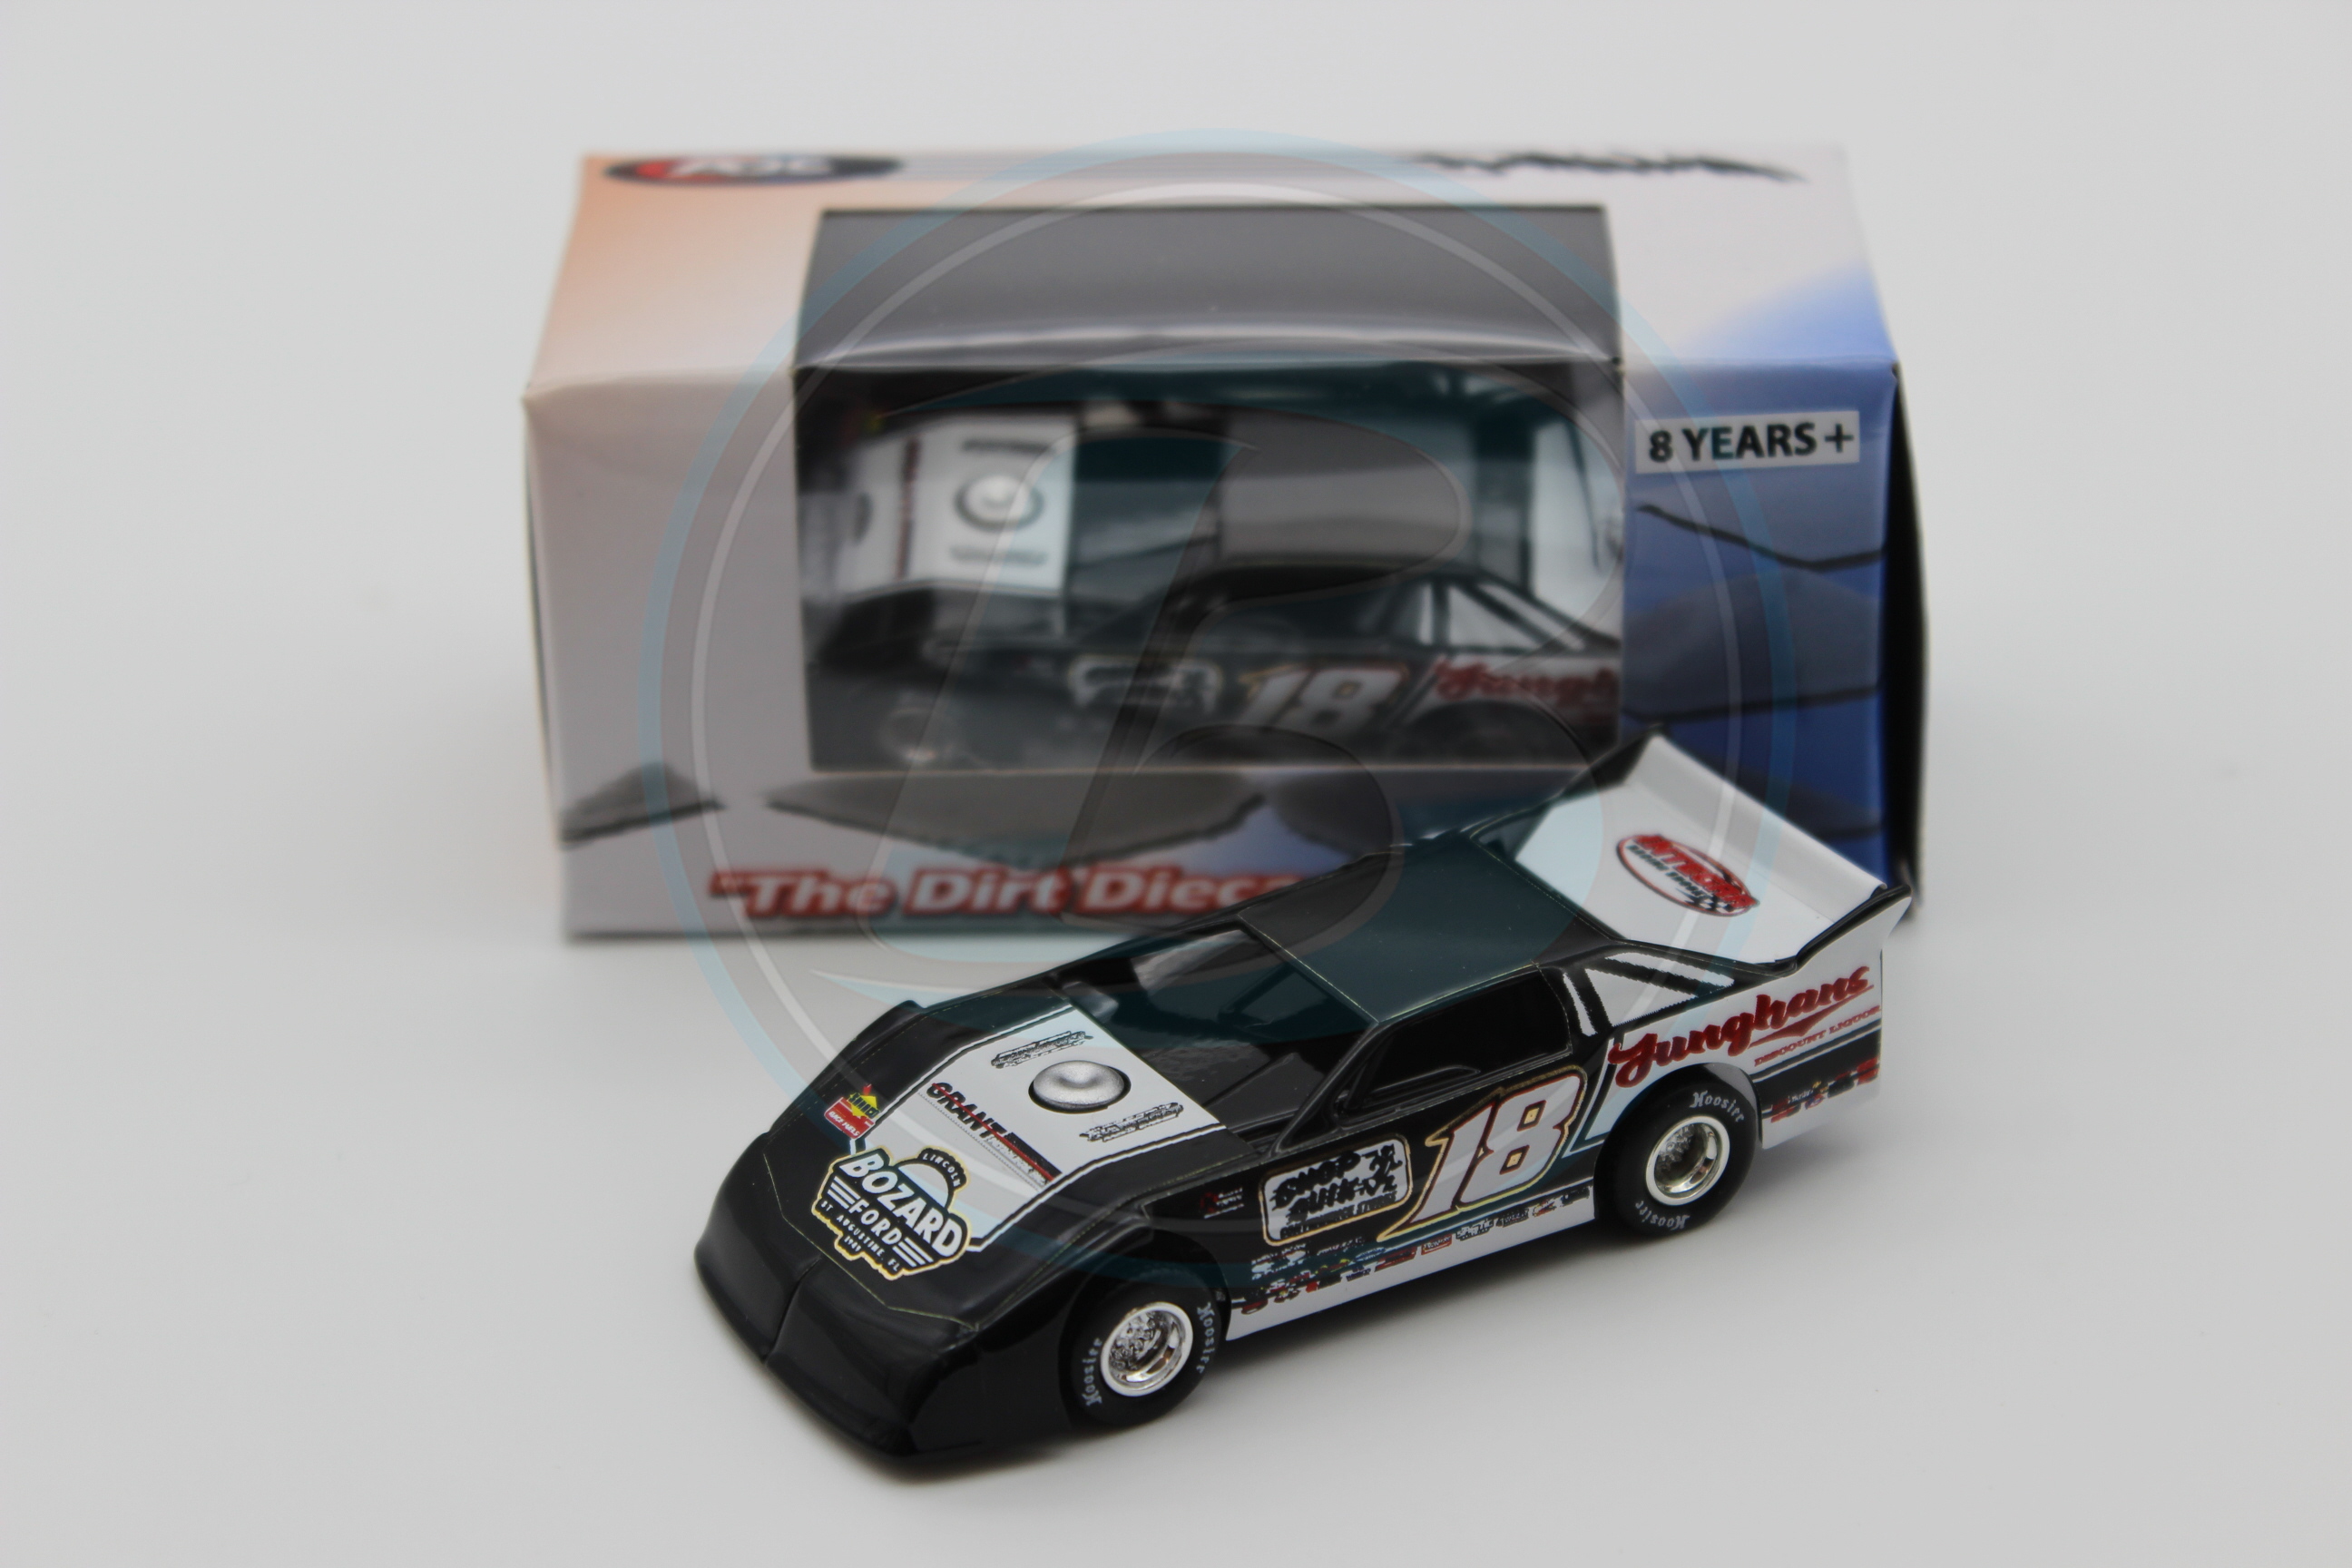 CHASE JUNGHANS #18 2021 1/64 ADC DIRT LATE MODEL DIECAST CAR DW621M291 